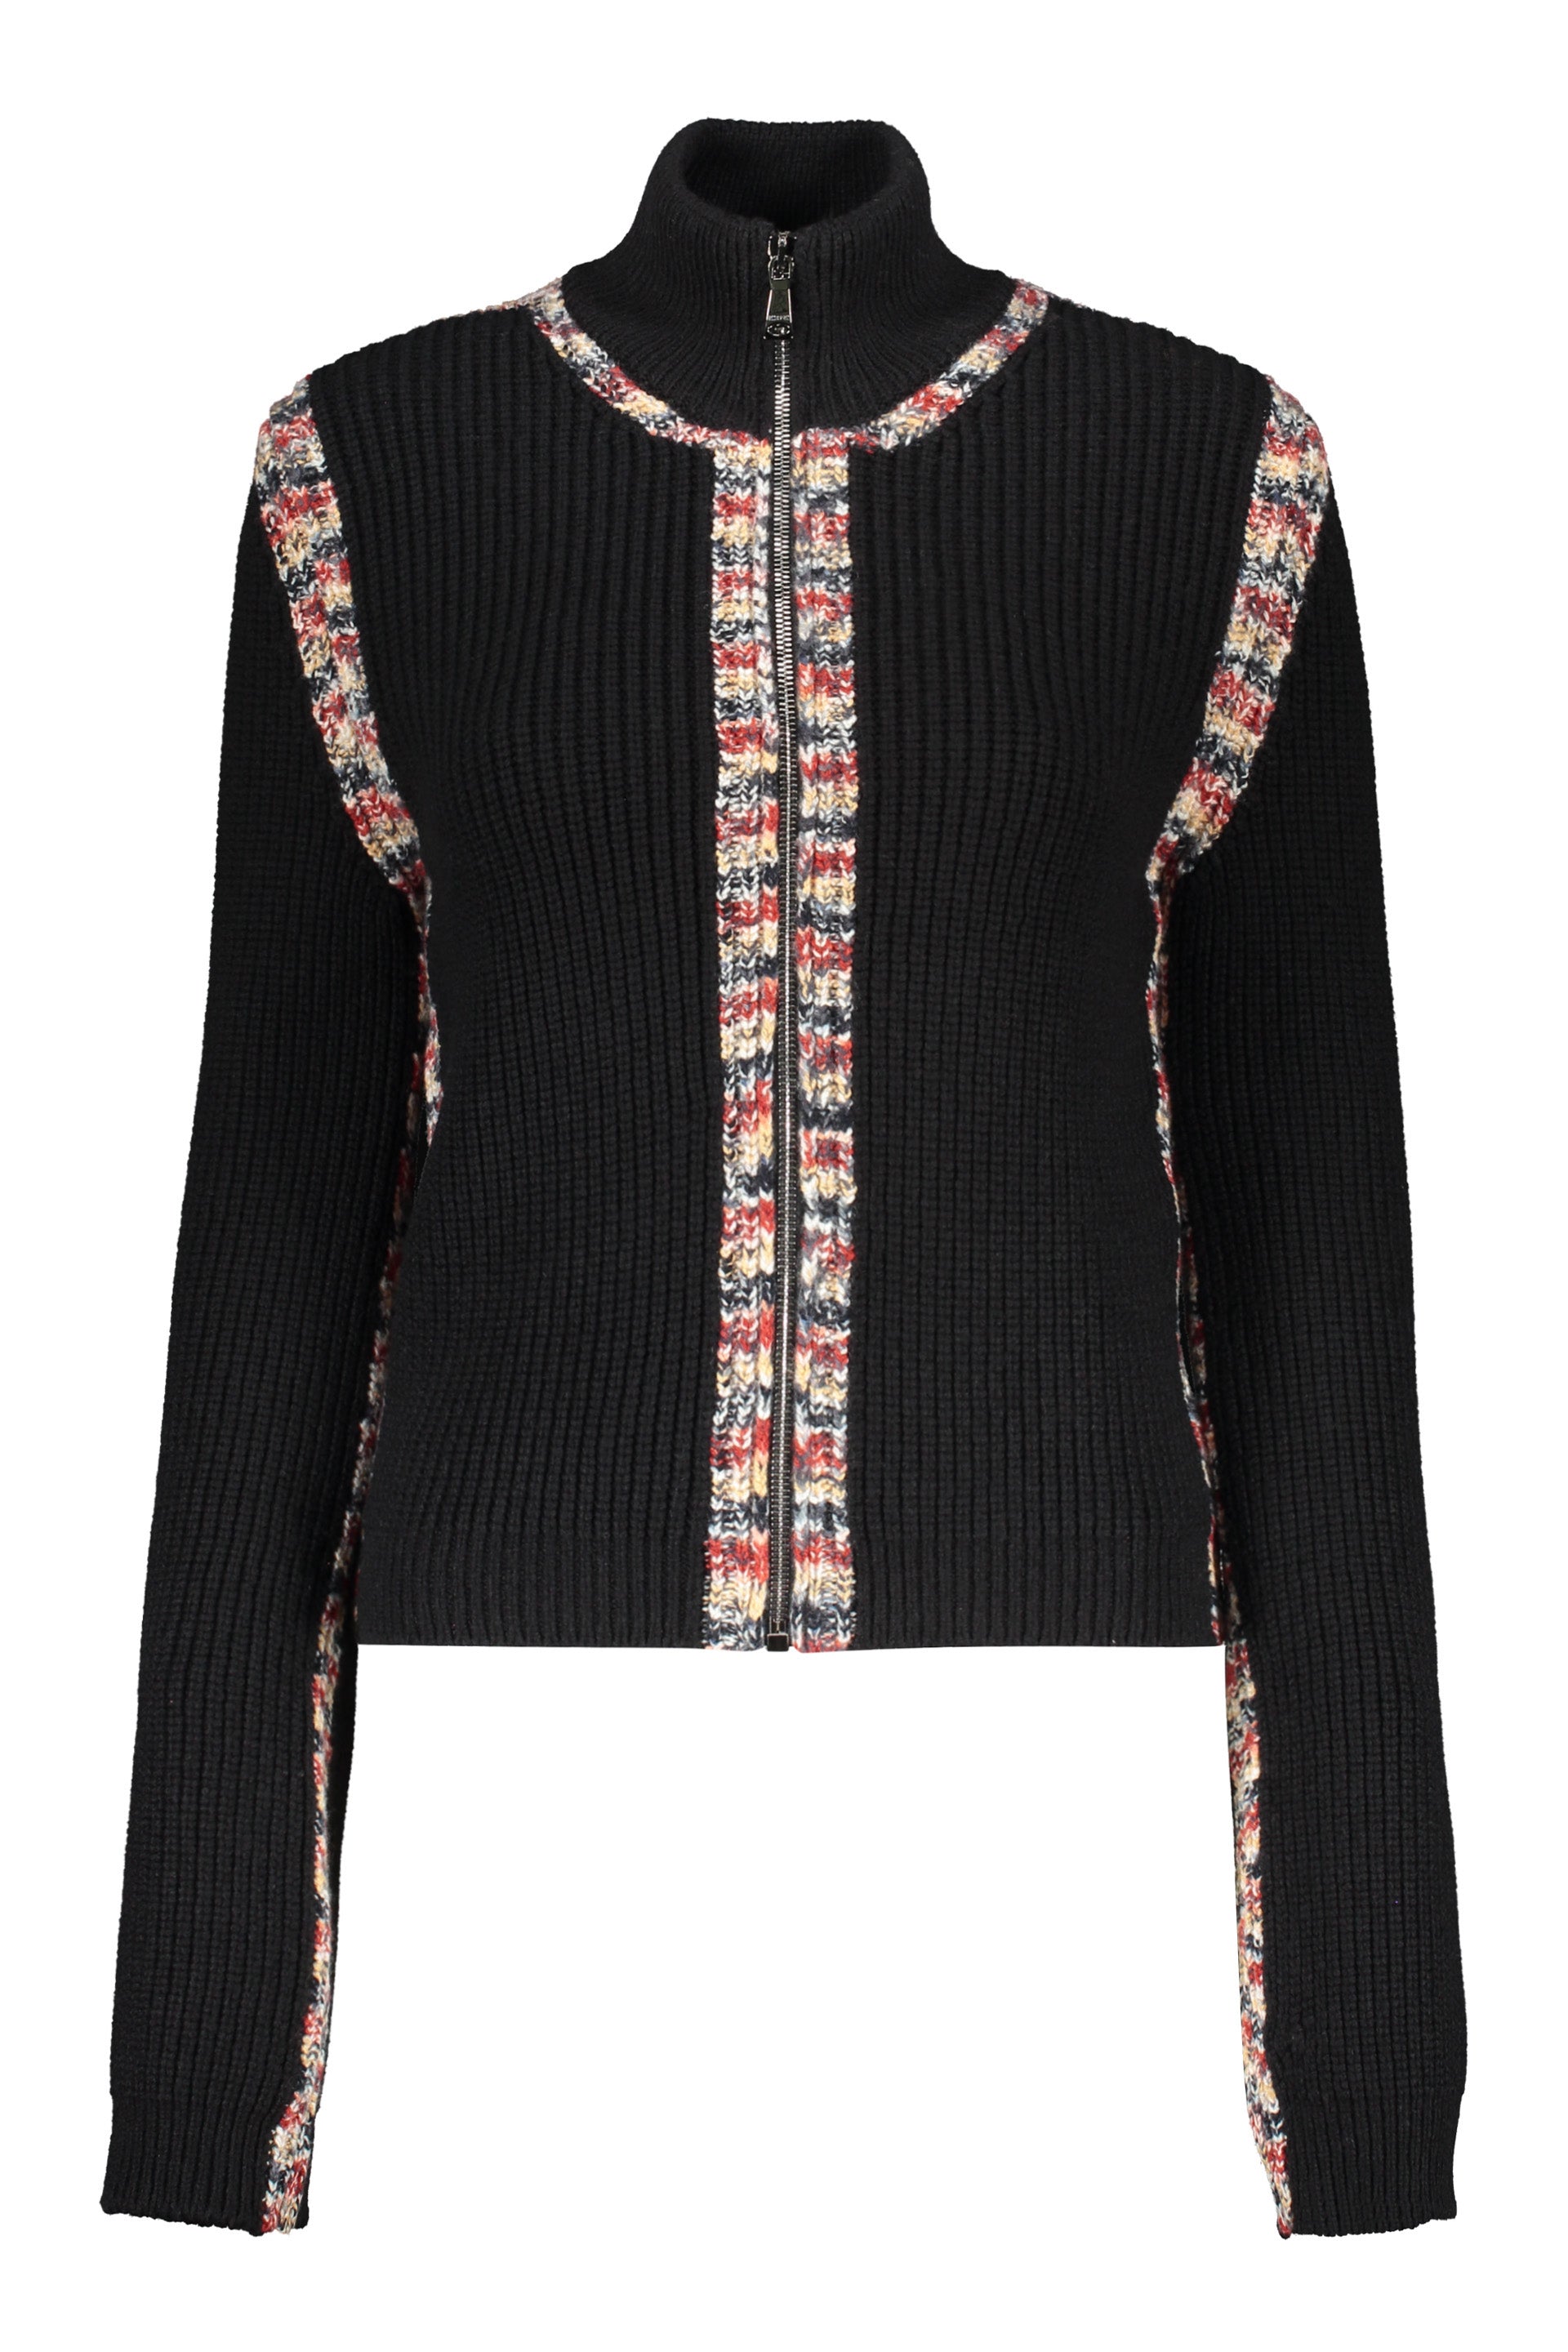 Missoni-OUTLET-SALE-Wool-stand-up-collar-sweater-Strick-40-ARCHIVE-COLLECTION.jpg